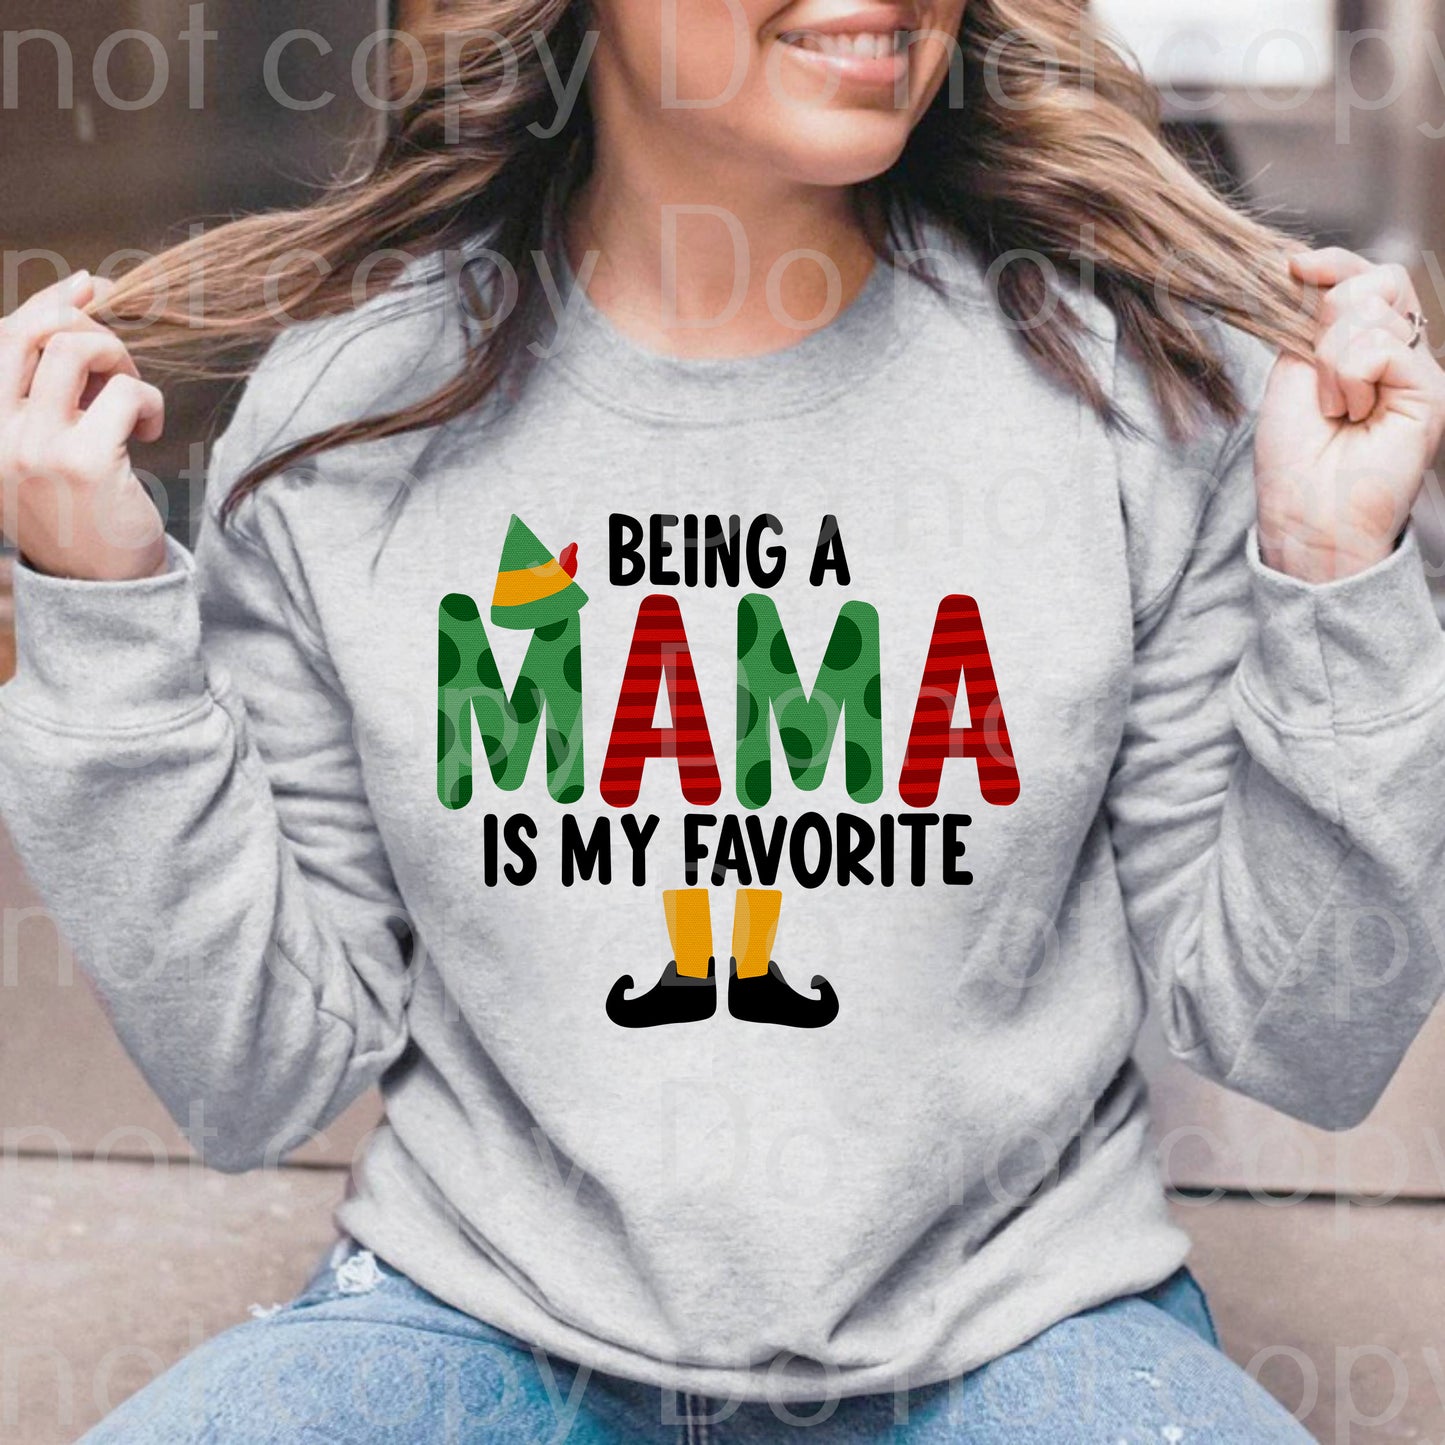 Being a Mama is my favorite *DREAM TRANSFER* DTF